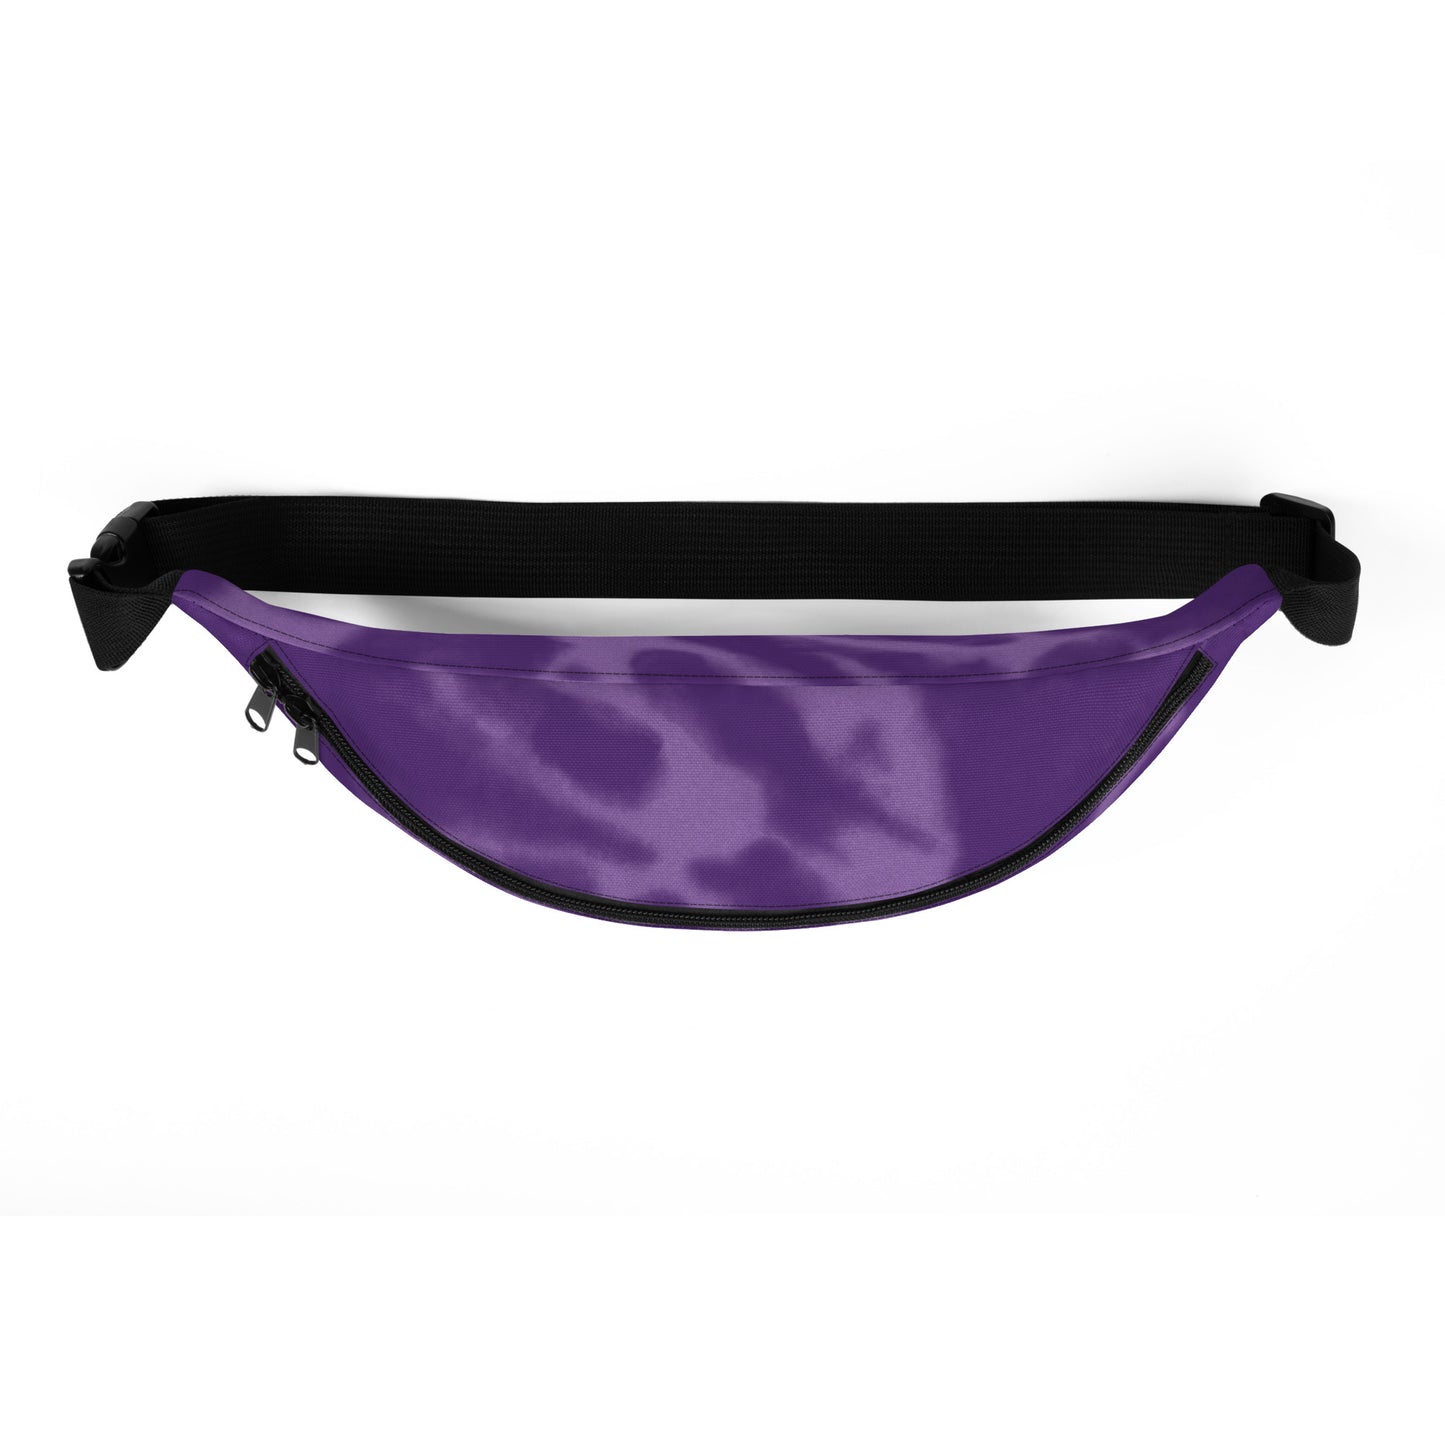 Travel Gift Fanny Pack - Purple Tie-Dye • SVO Moscow • YHM Designs - Image 08